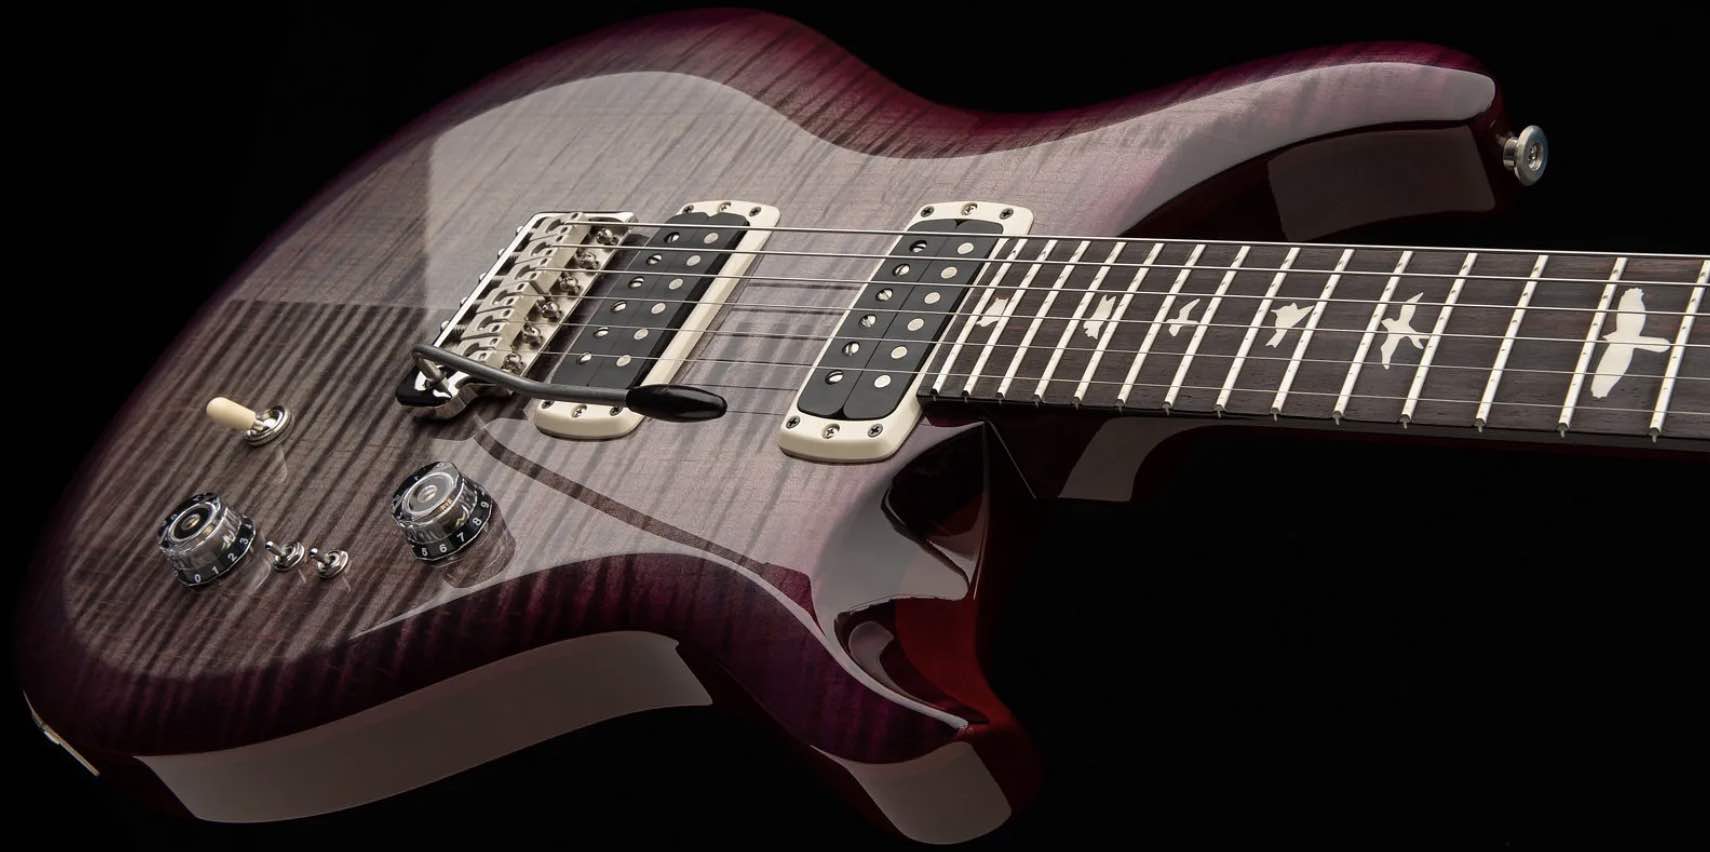 PRS Custom 24-08 model now ships with the US TCI pickups